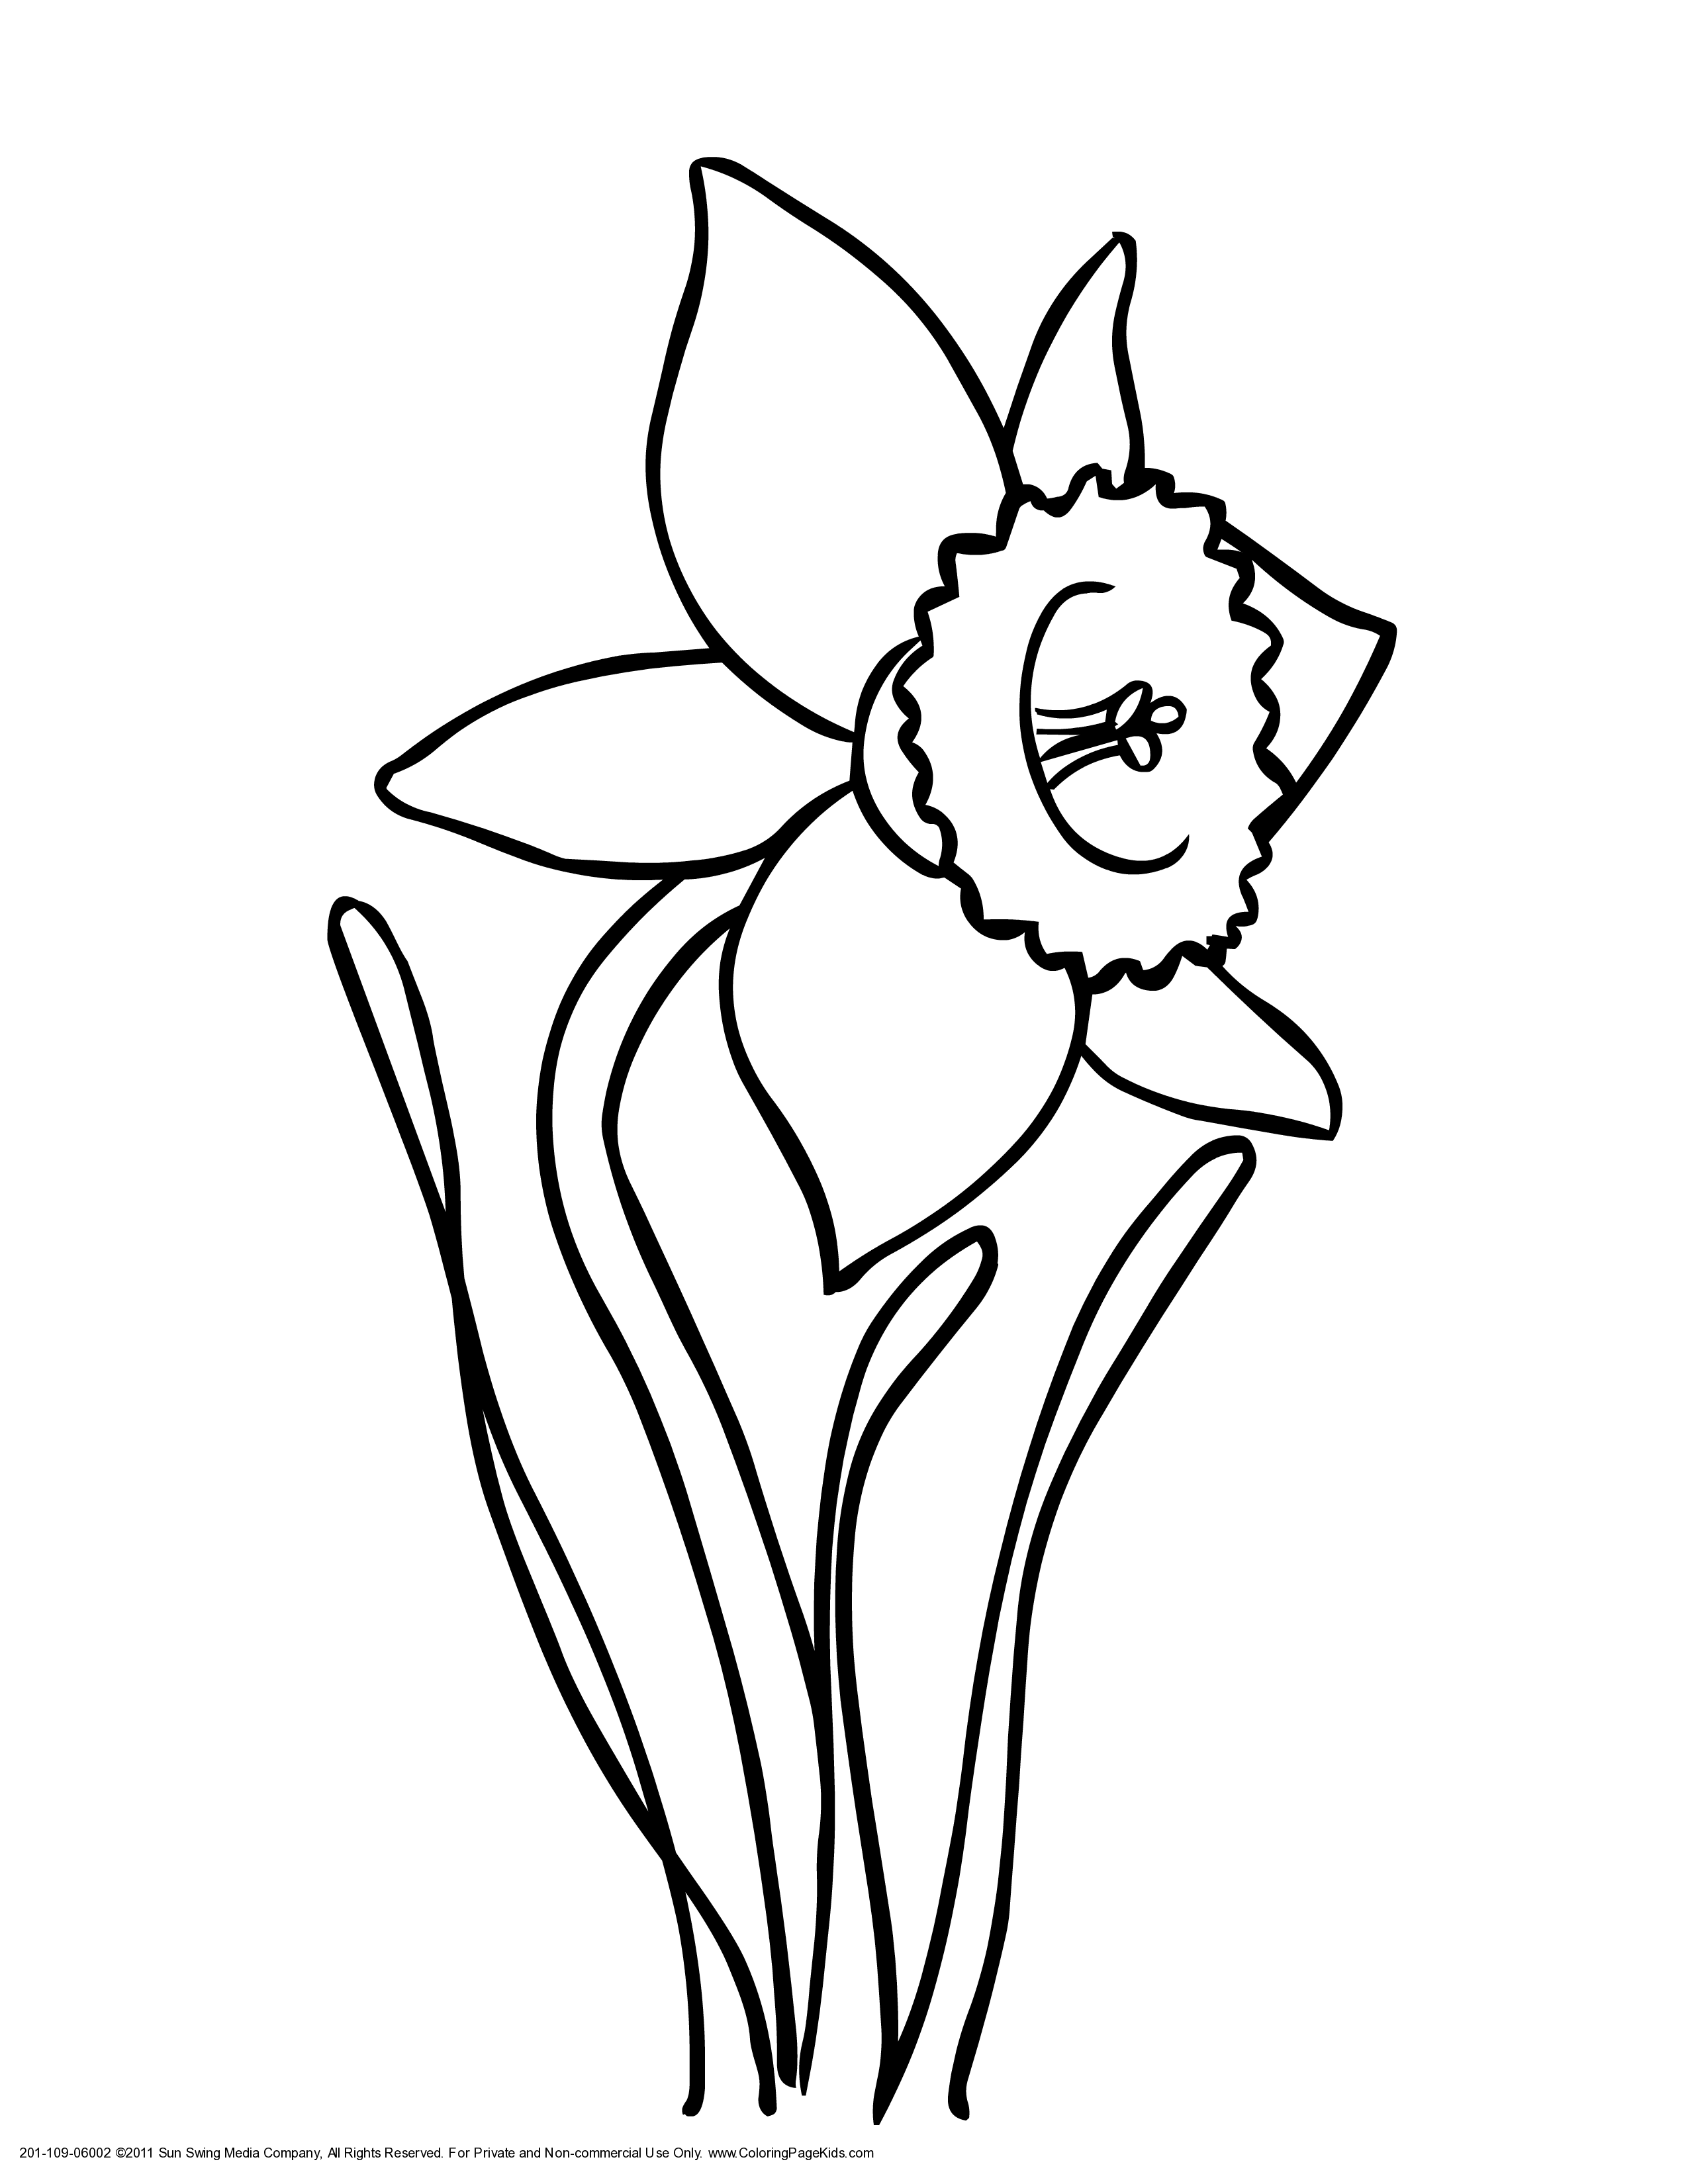 black and white clipart of daffodils - Clip Art Library